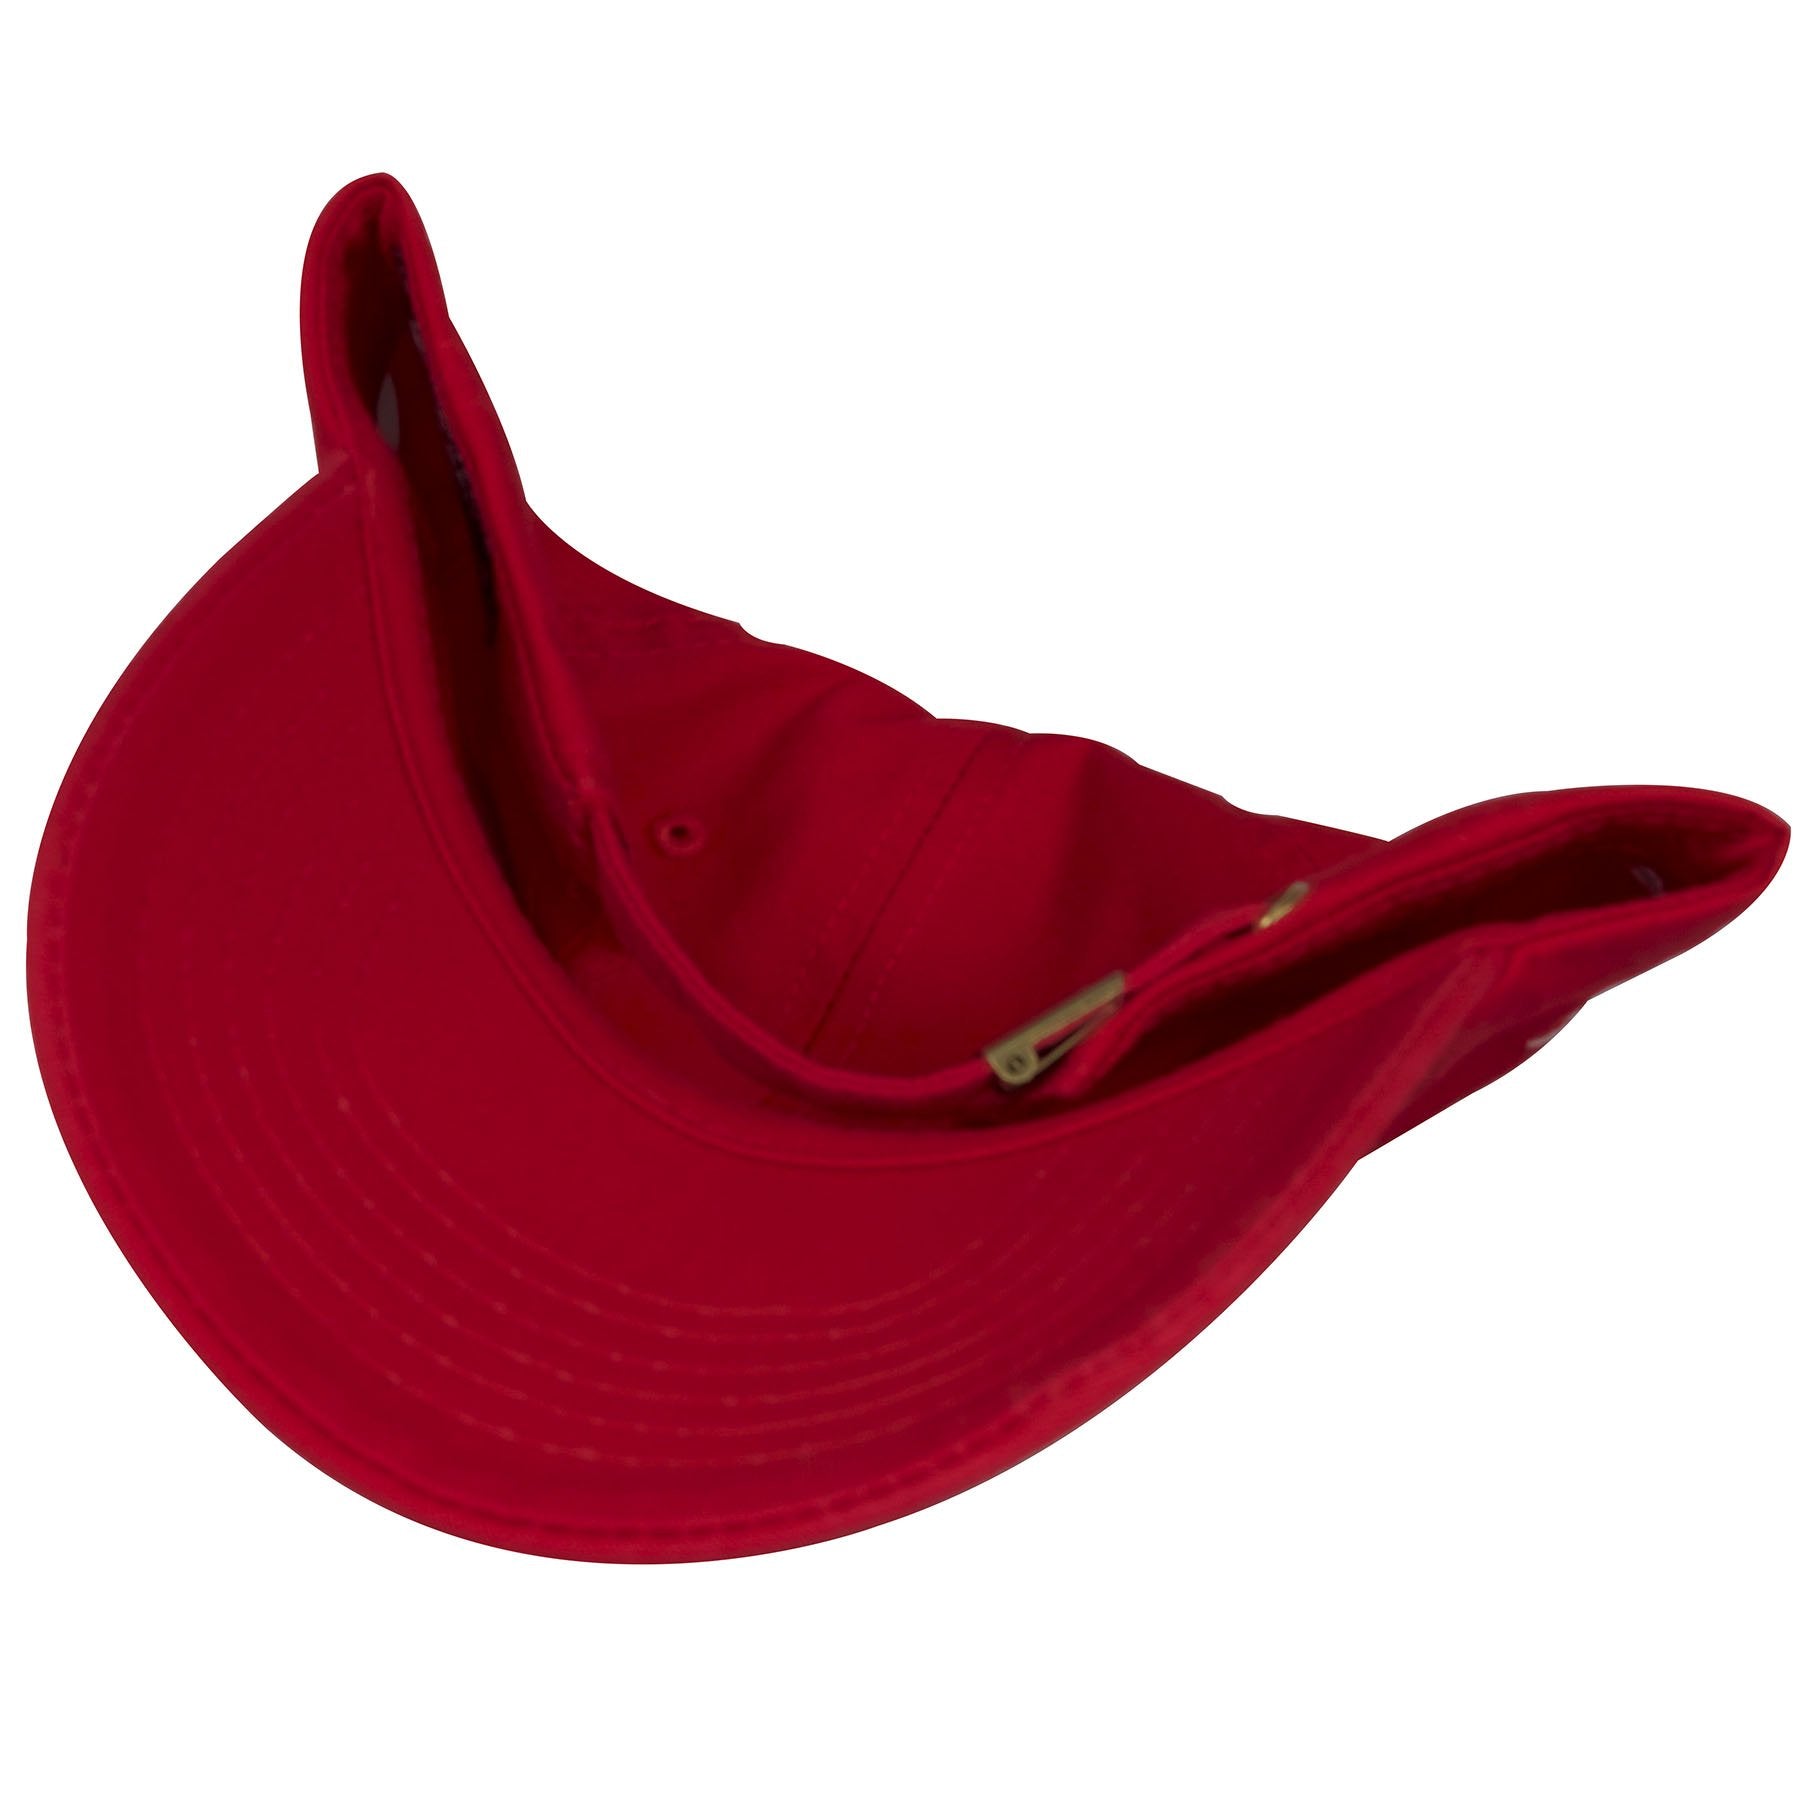 The under brim and interior of the Chinese Food Take Out Box dad hat, are both red.